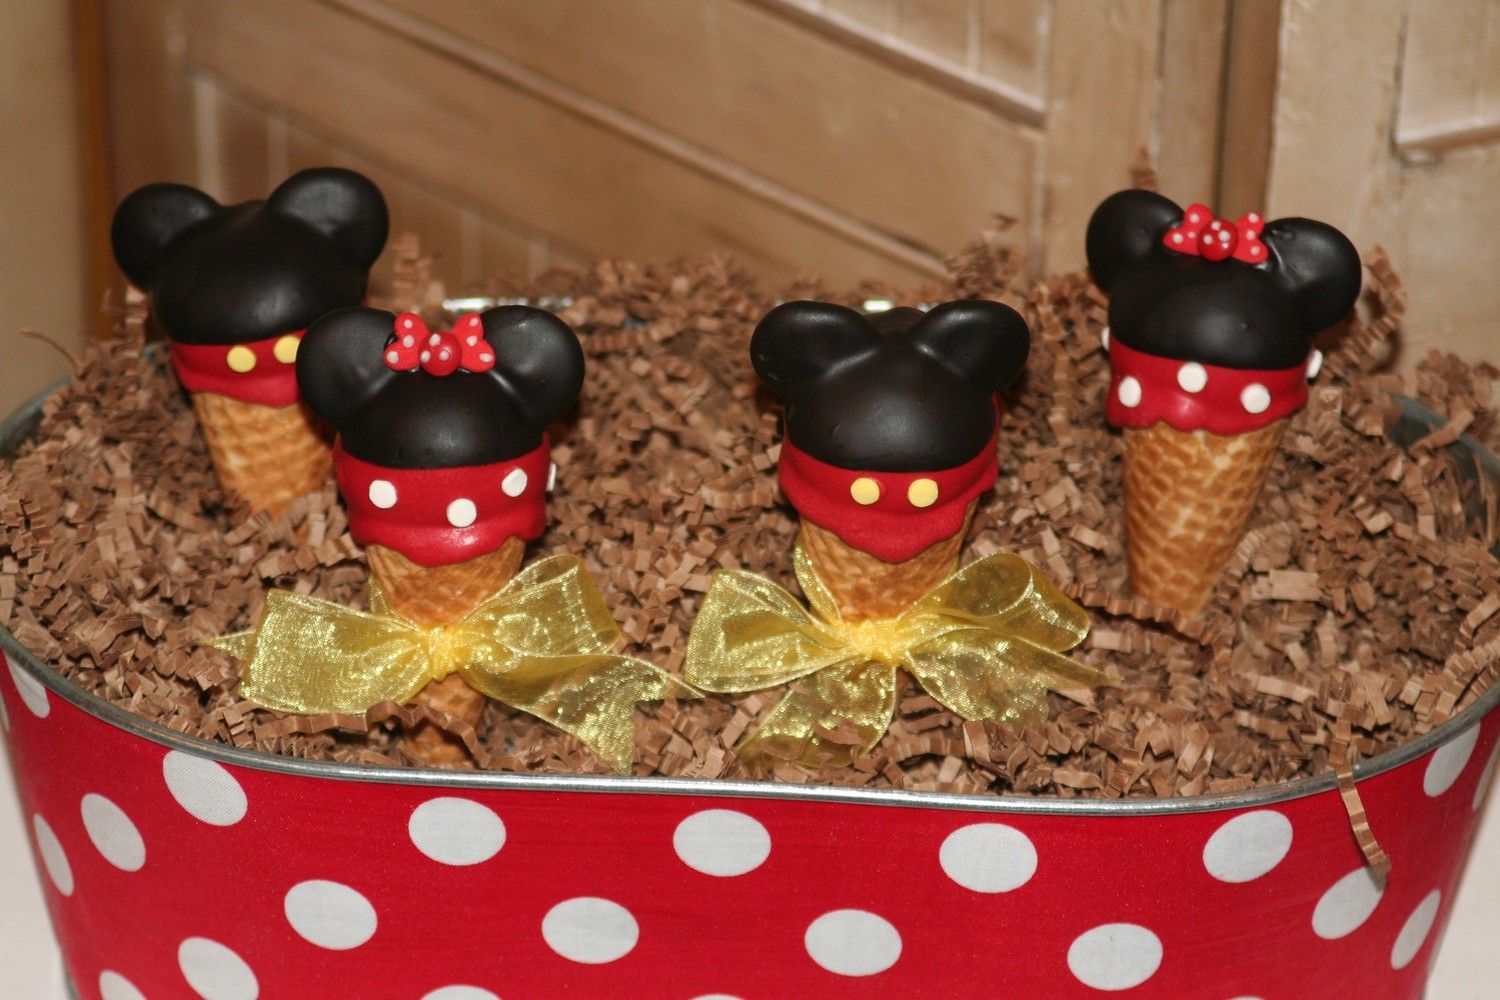 Mom’s Killer Cakes Mickey and Minnie Mouse Inspired Ice Cream Cone Cake Pops